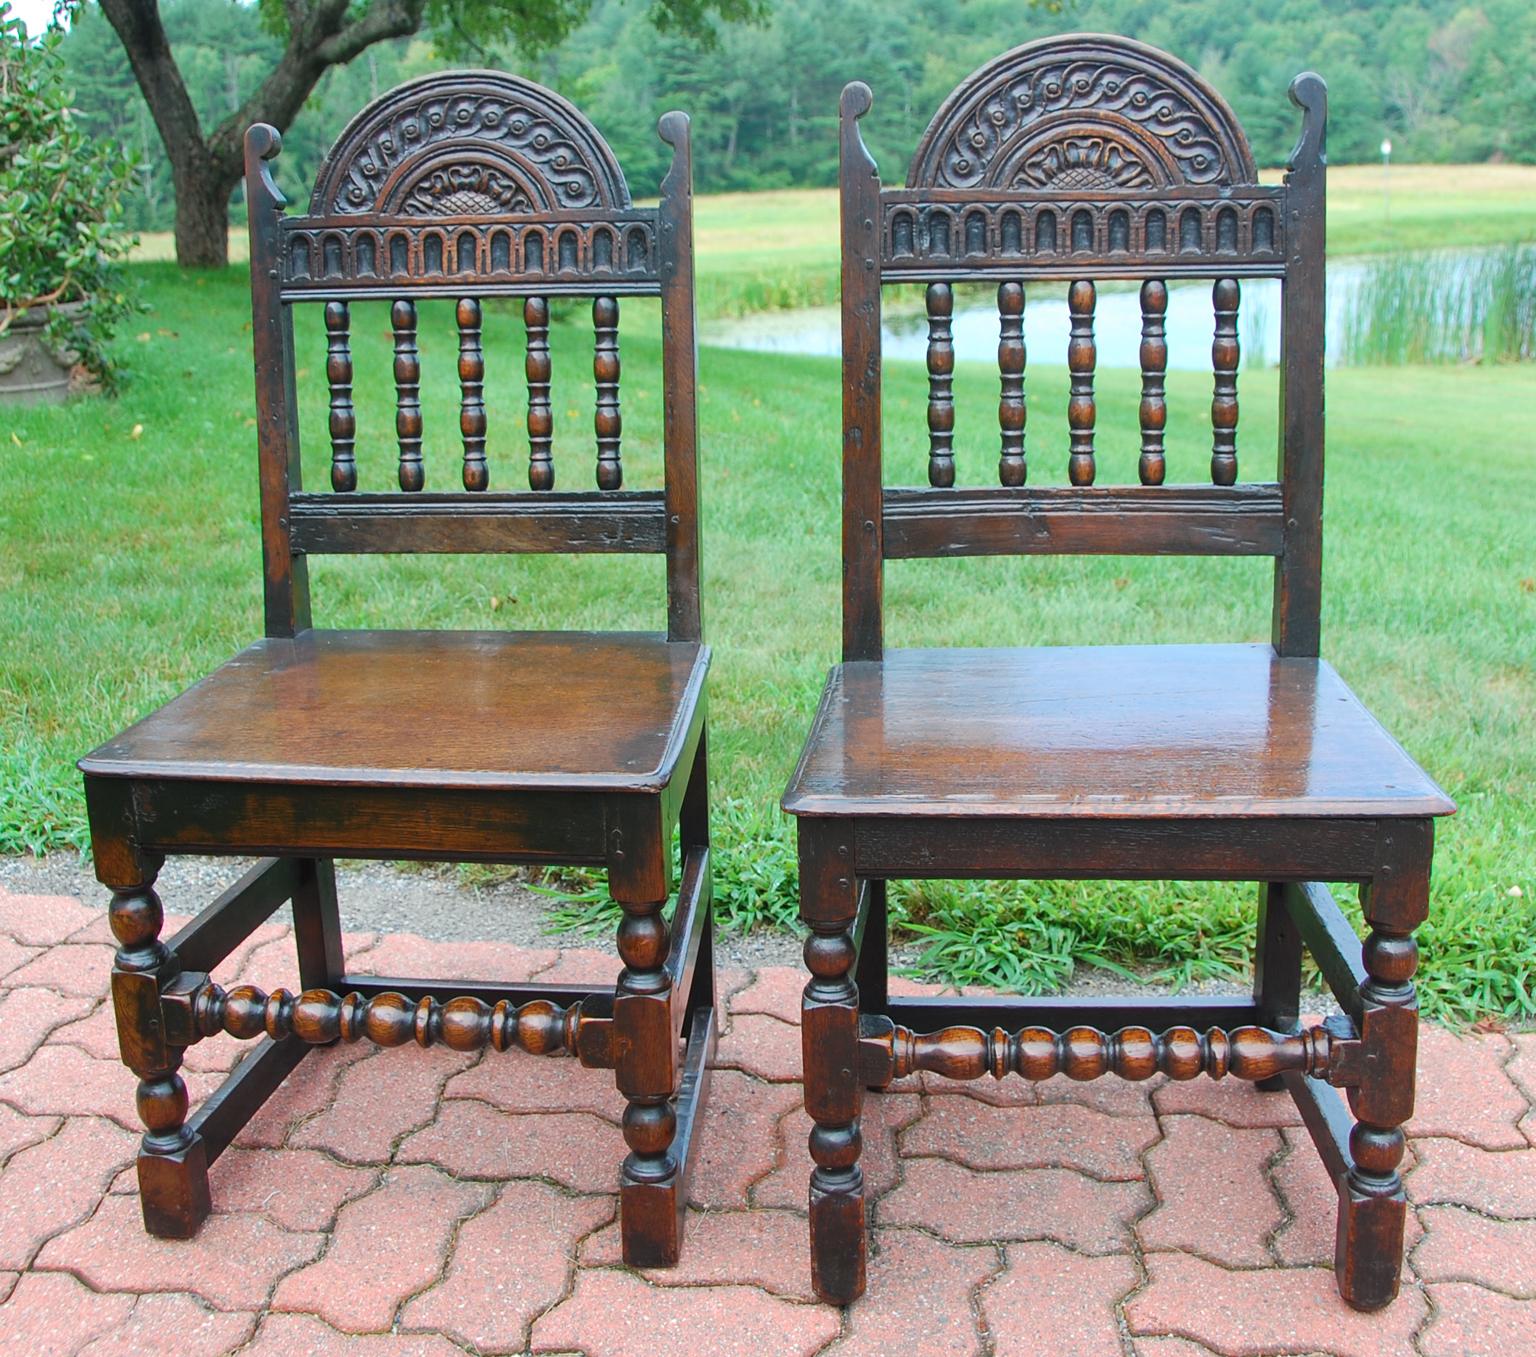 English period Charles II pair of oak carved side chairs, referred to as back stools in this era. These 17th century chairs have wonderful hand-turned spindles and chisel carved back with sunflower, lunettes and rope and circle motifs. These were